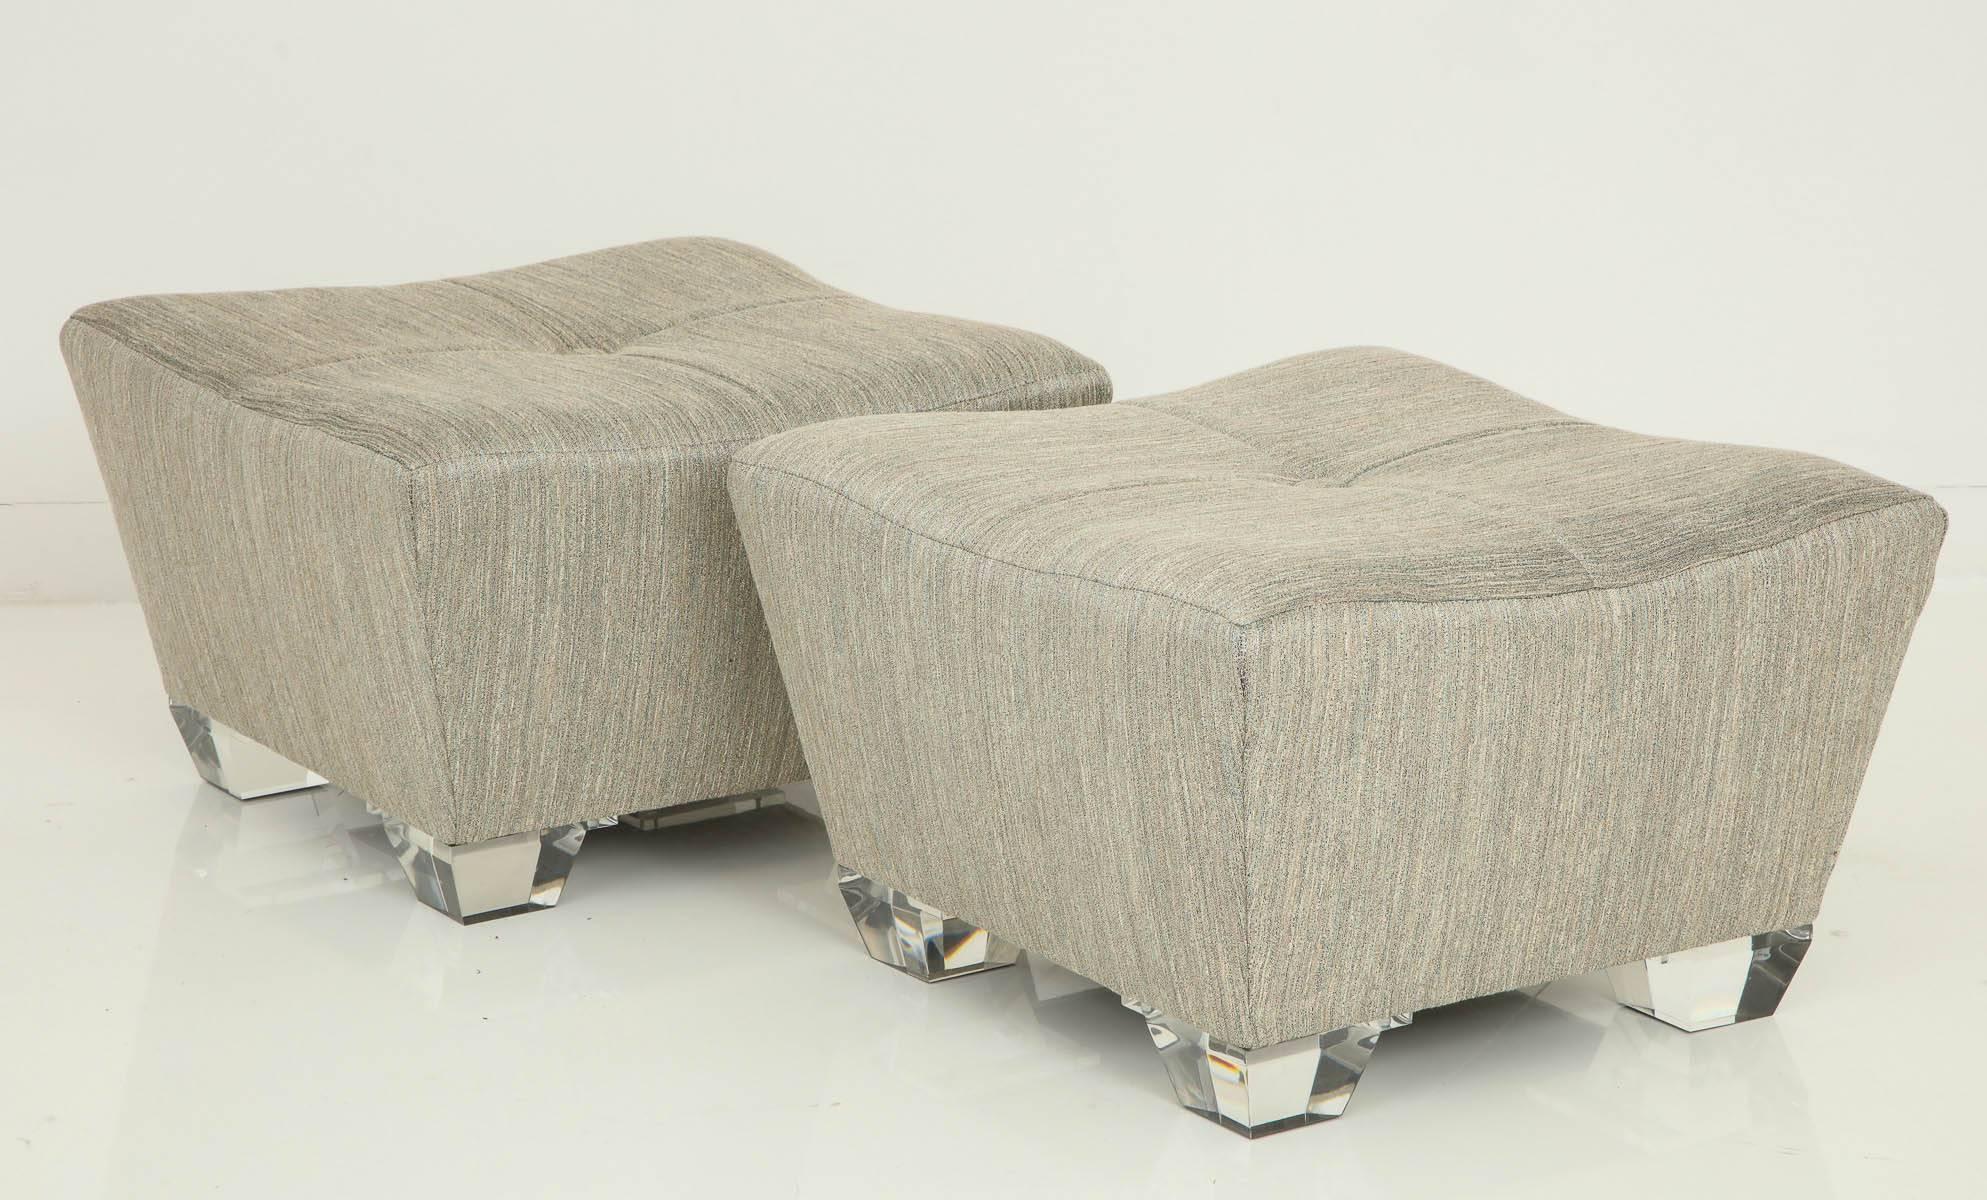 Pair of glamorous ottomans that have a Trapezoid shape.
The ottomans have been newly reupholstered in a luxurious fabric and are set up on thick Lucite legs that follow the same trapezoid shape as the ottomans.